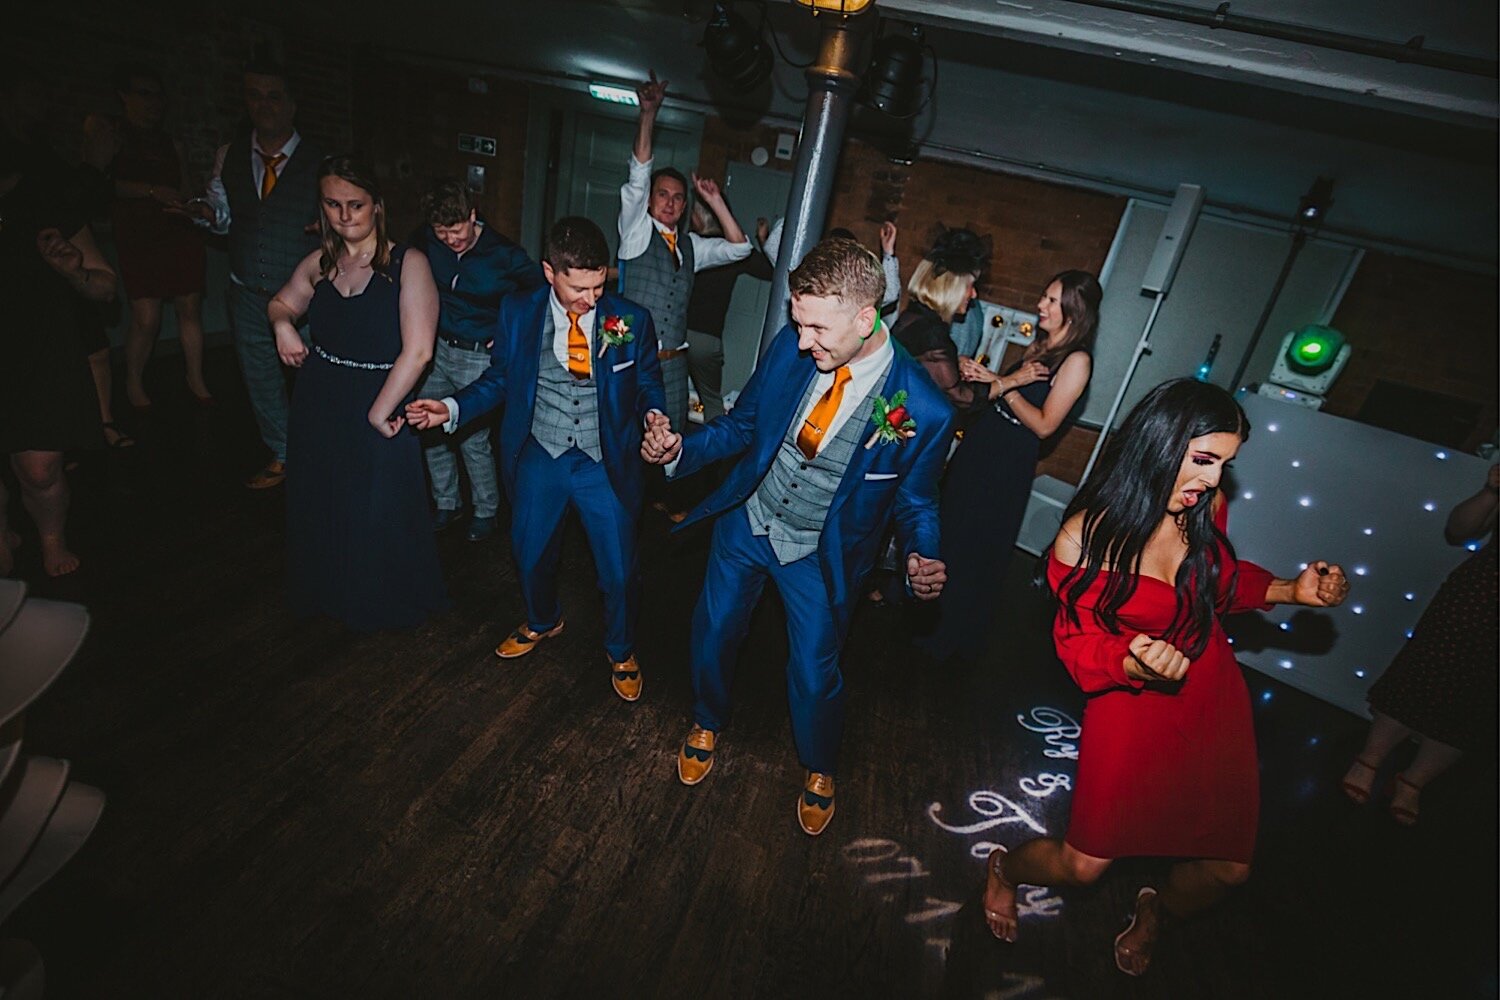 92_TWS-1058_photographer_wedding_industrial_venue_gay_grooms_photography_party_chic_westmill_derby.jpg